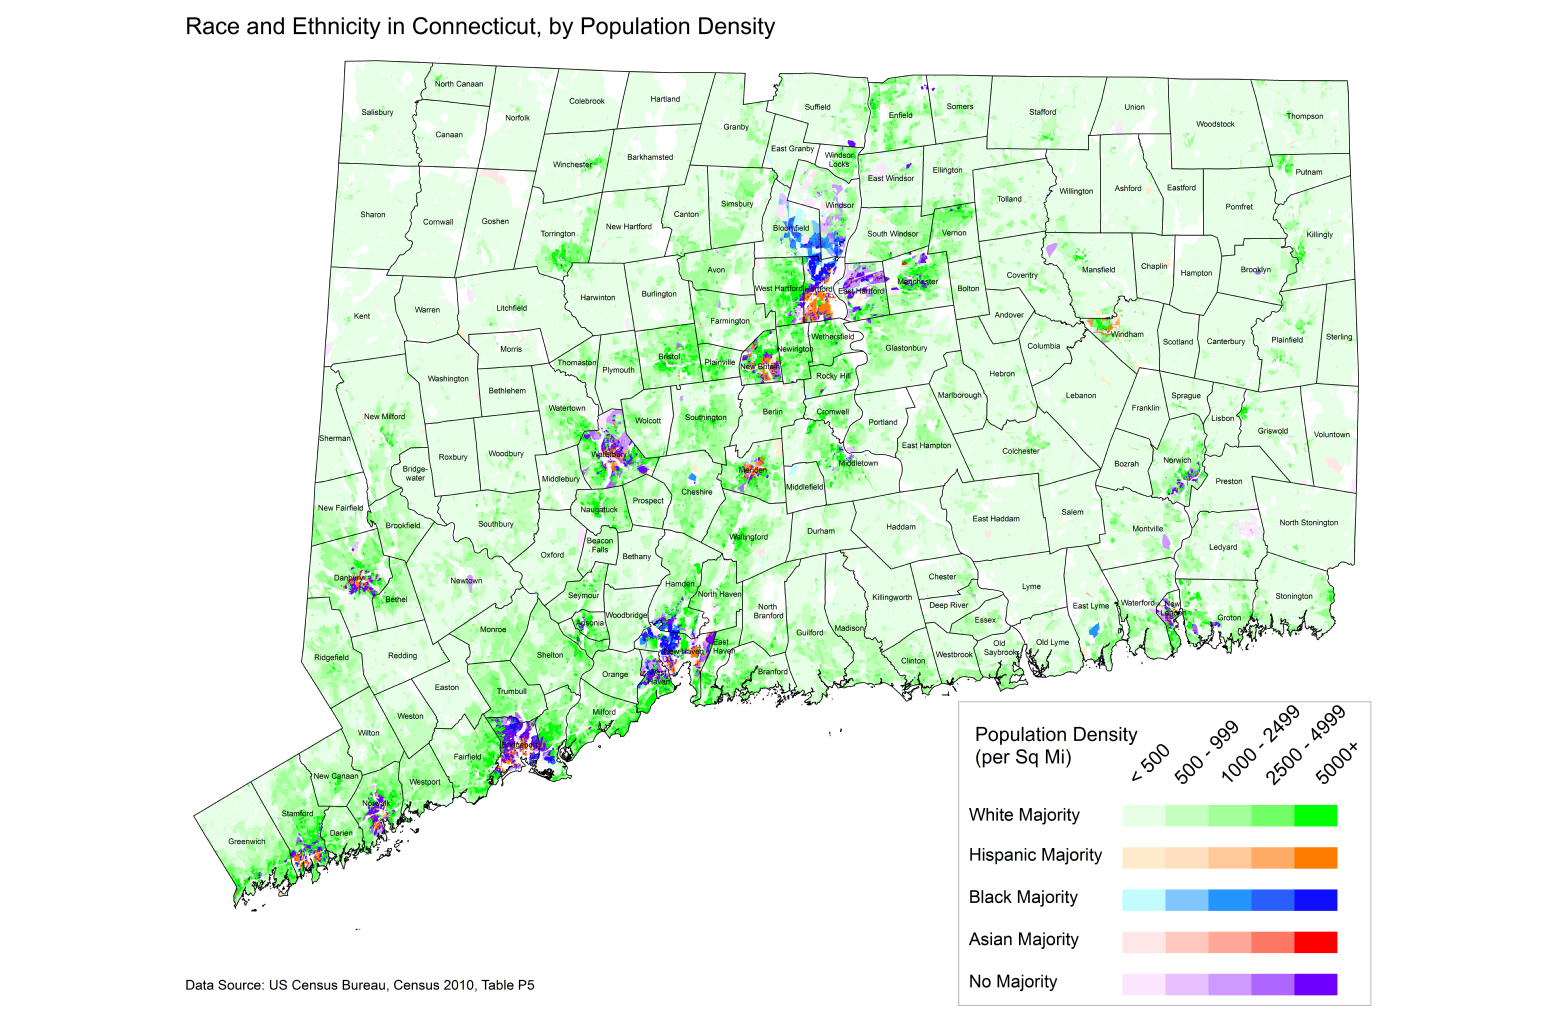 Race and Ethnicity map of Connecticut with all counties delineated and green showing more white people and other colors concentrated in small areas showing people of color